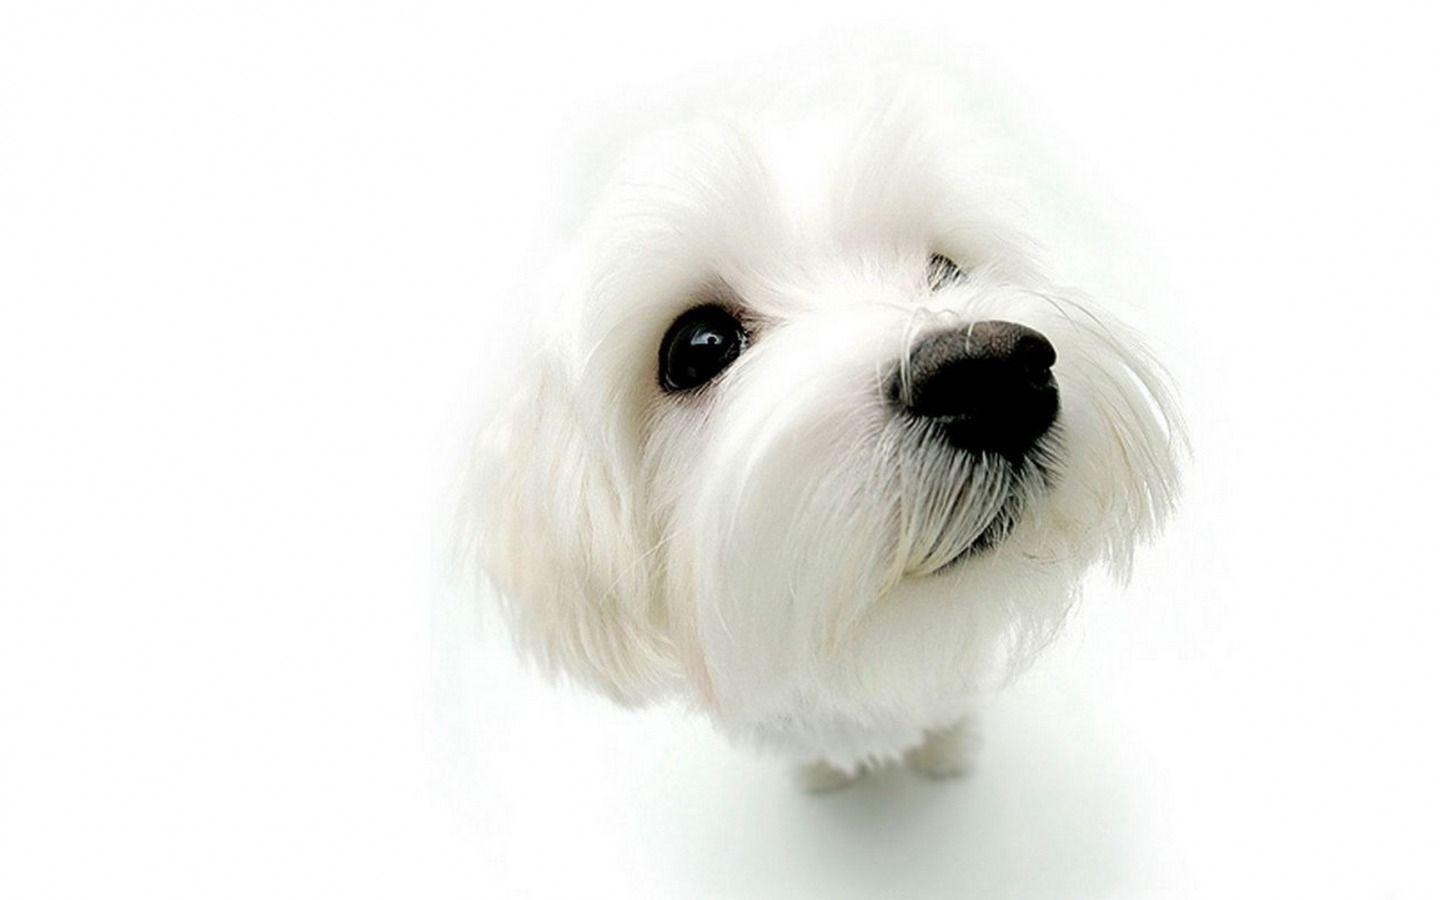 The White Dogs Funny Wallpaper HD 28 Wallpaper. High